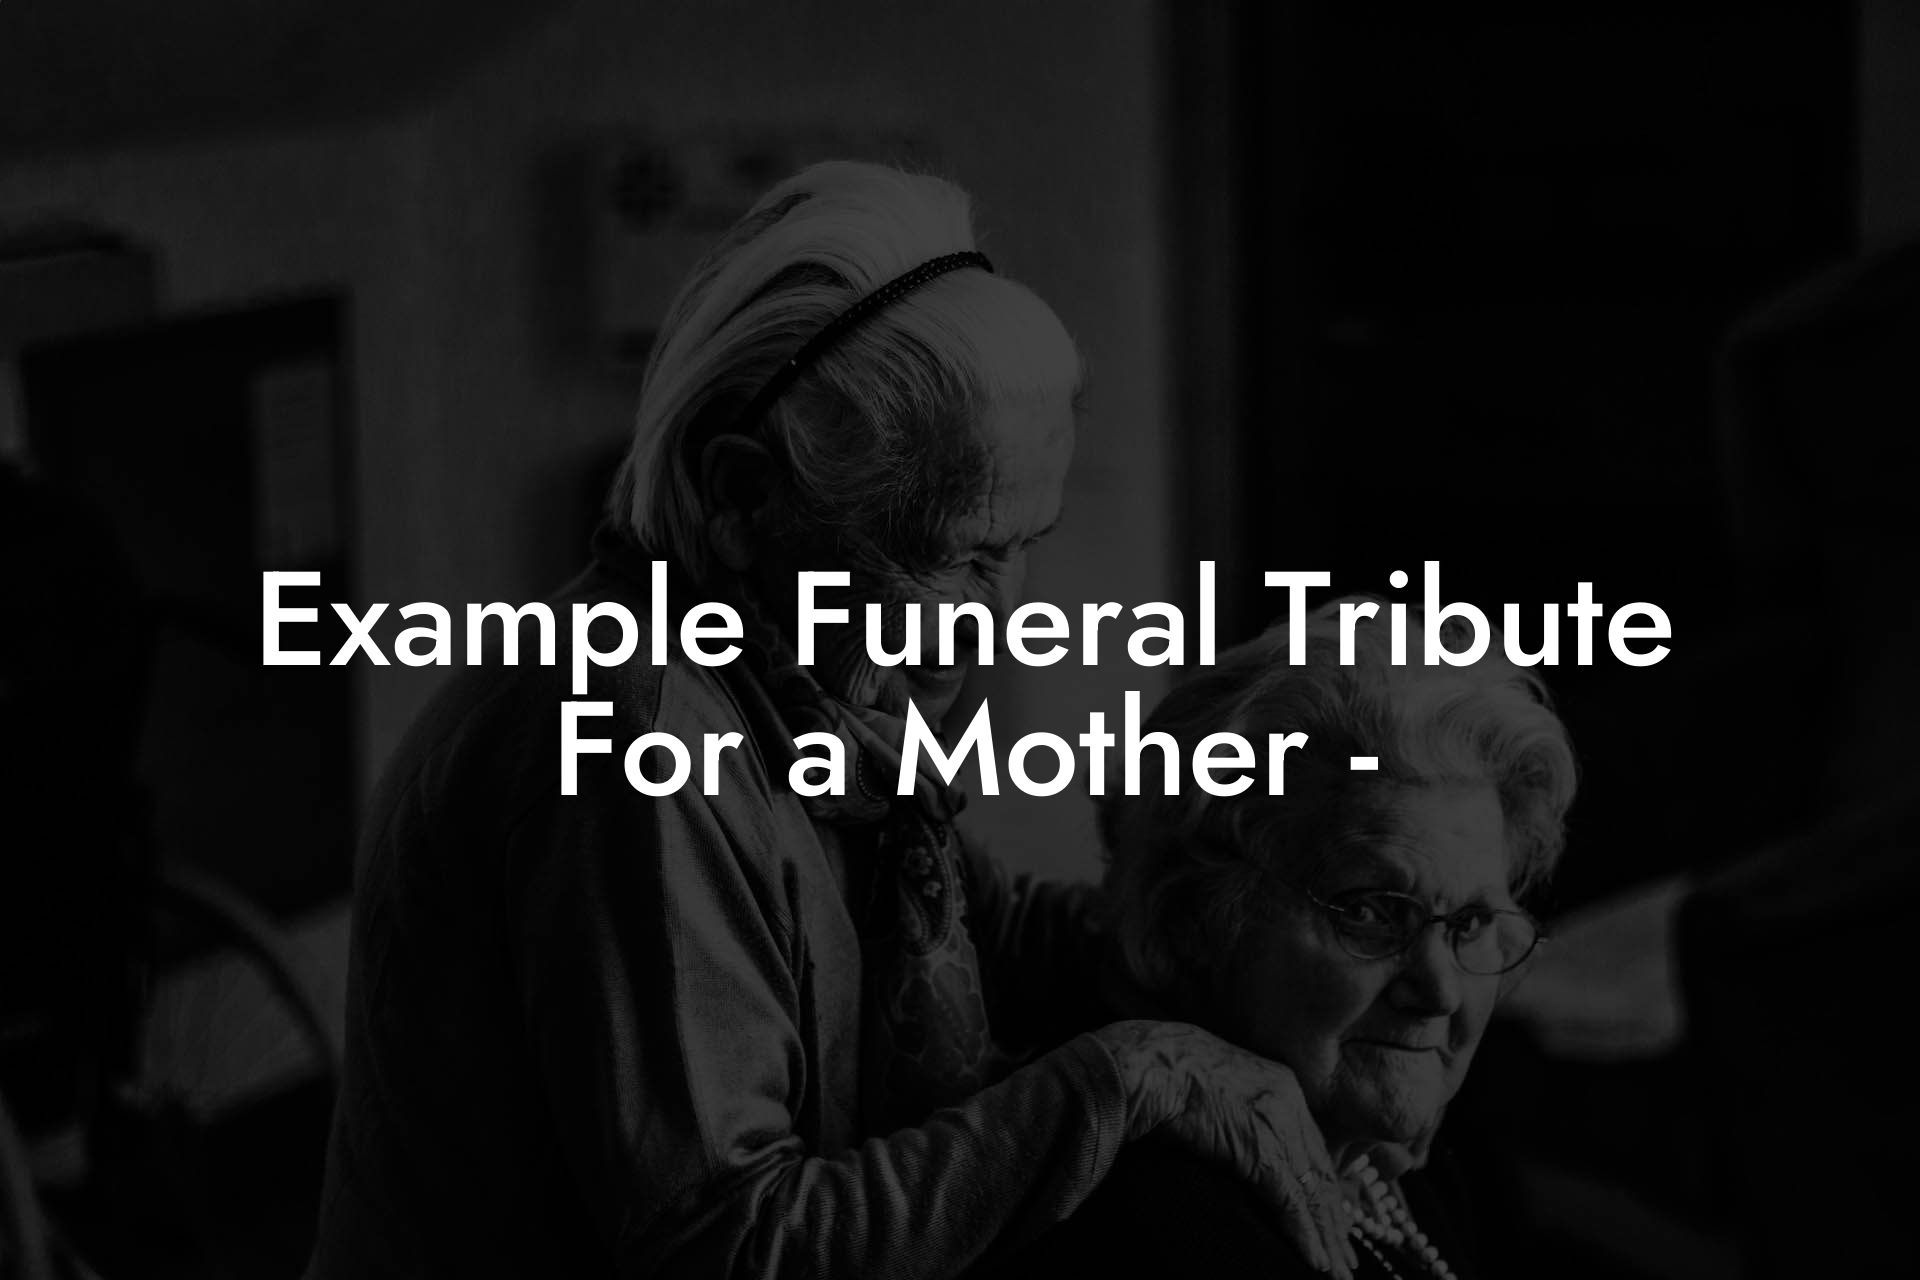 Example Funeral Tribute For a Mother - - Eulogy Assistant